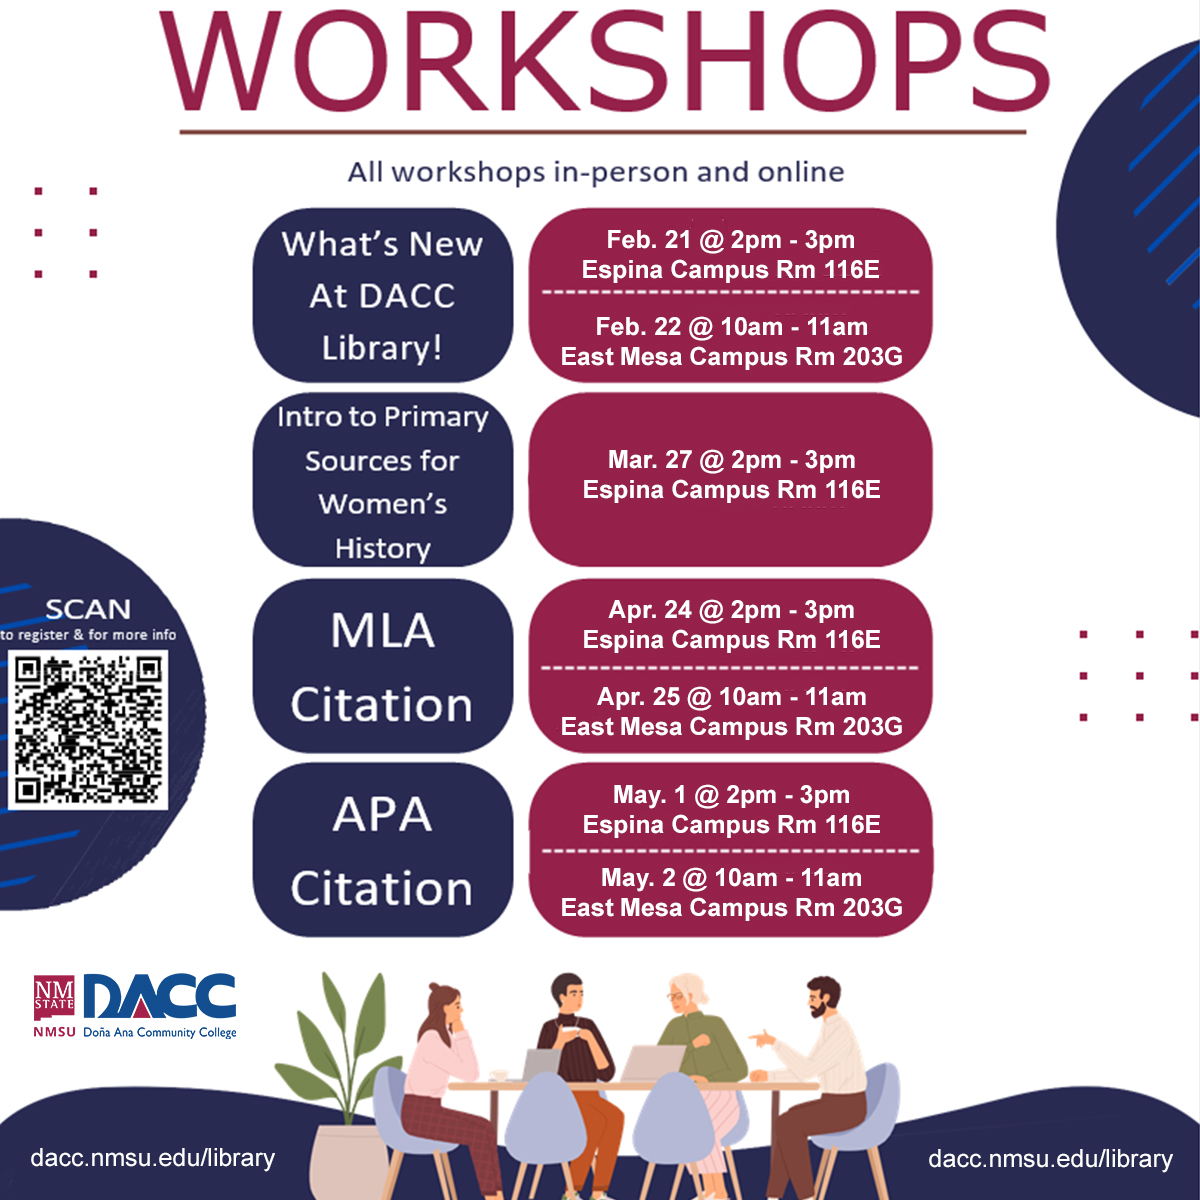 Need help understanding MLA or APA citations? Find out what's new at the DACC Library. Join us for some workshops at the DACC Library Espina Campus and East Mesa Campus. All workshops in-person and online. Visit dacc.nmsu.edu/library for more information. #WeAreDACC